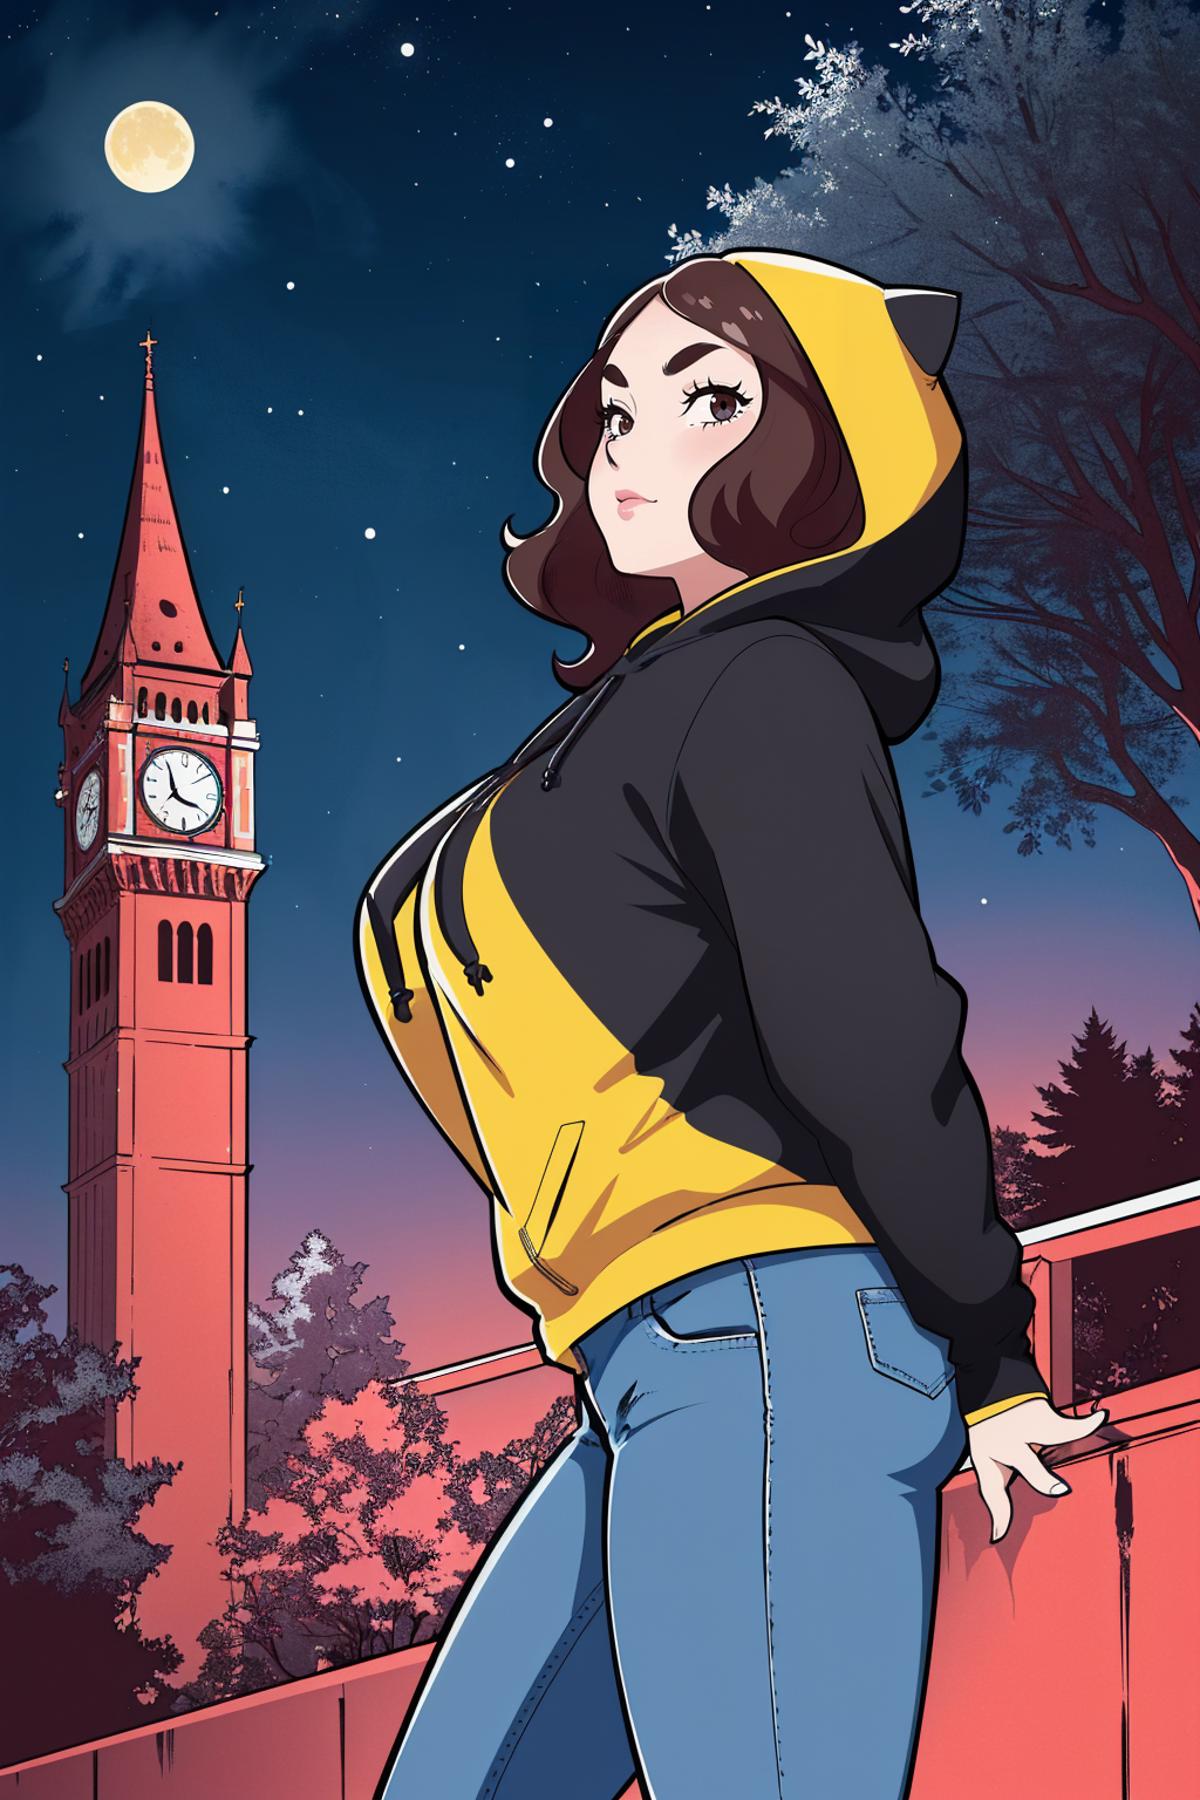 A cartoon image of a woman wearing a black and yellow hoodie in front of a clock tower at night.